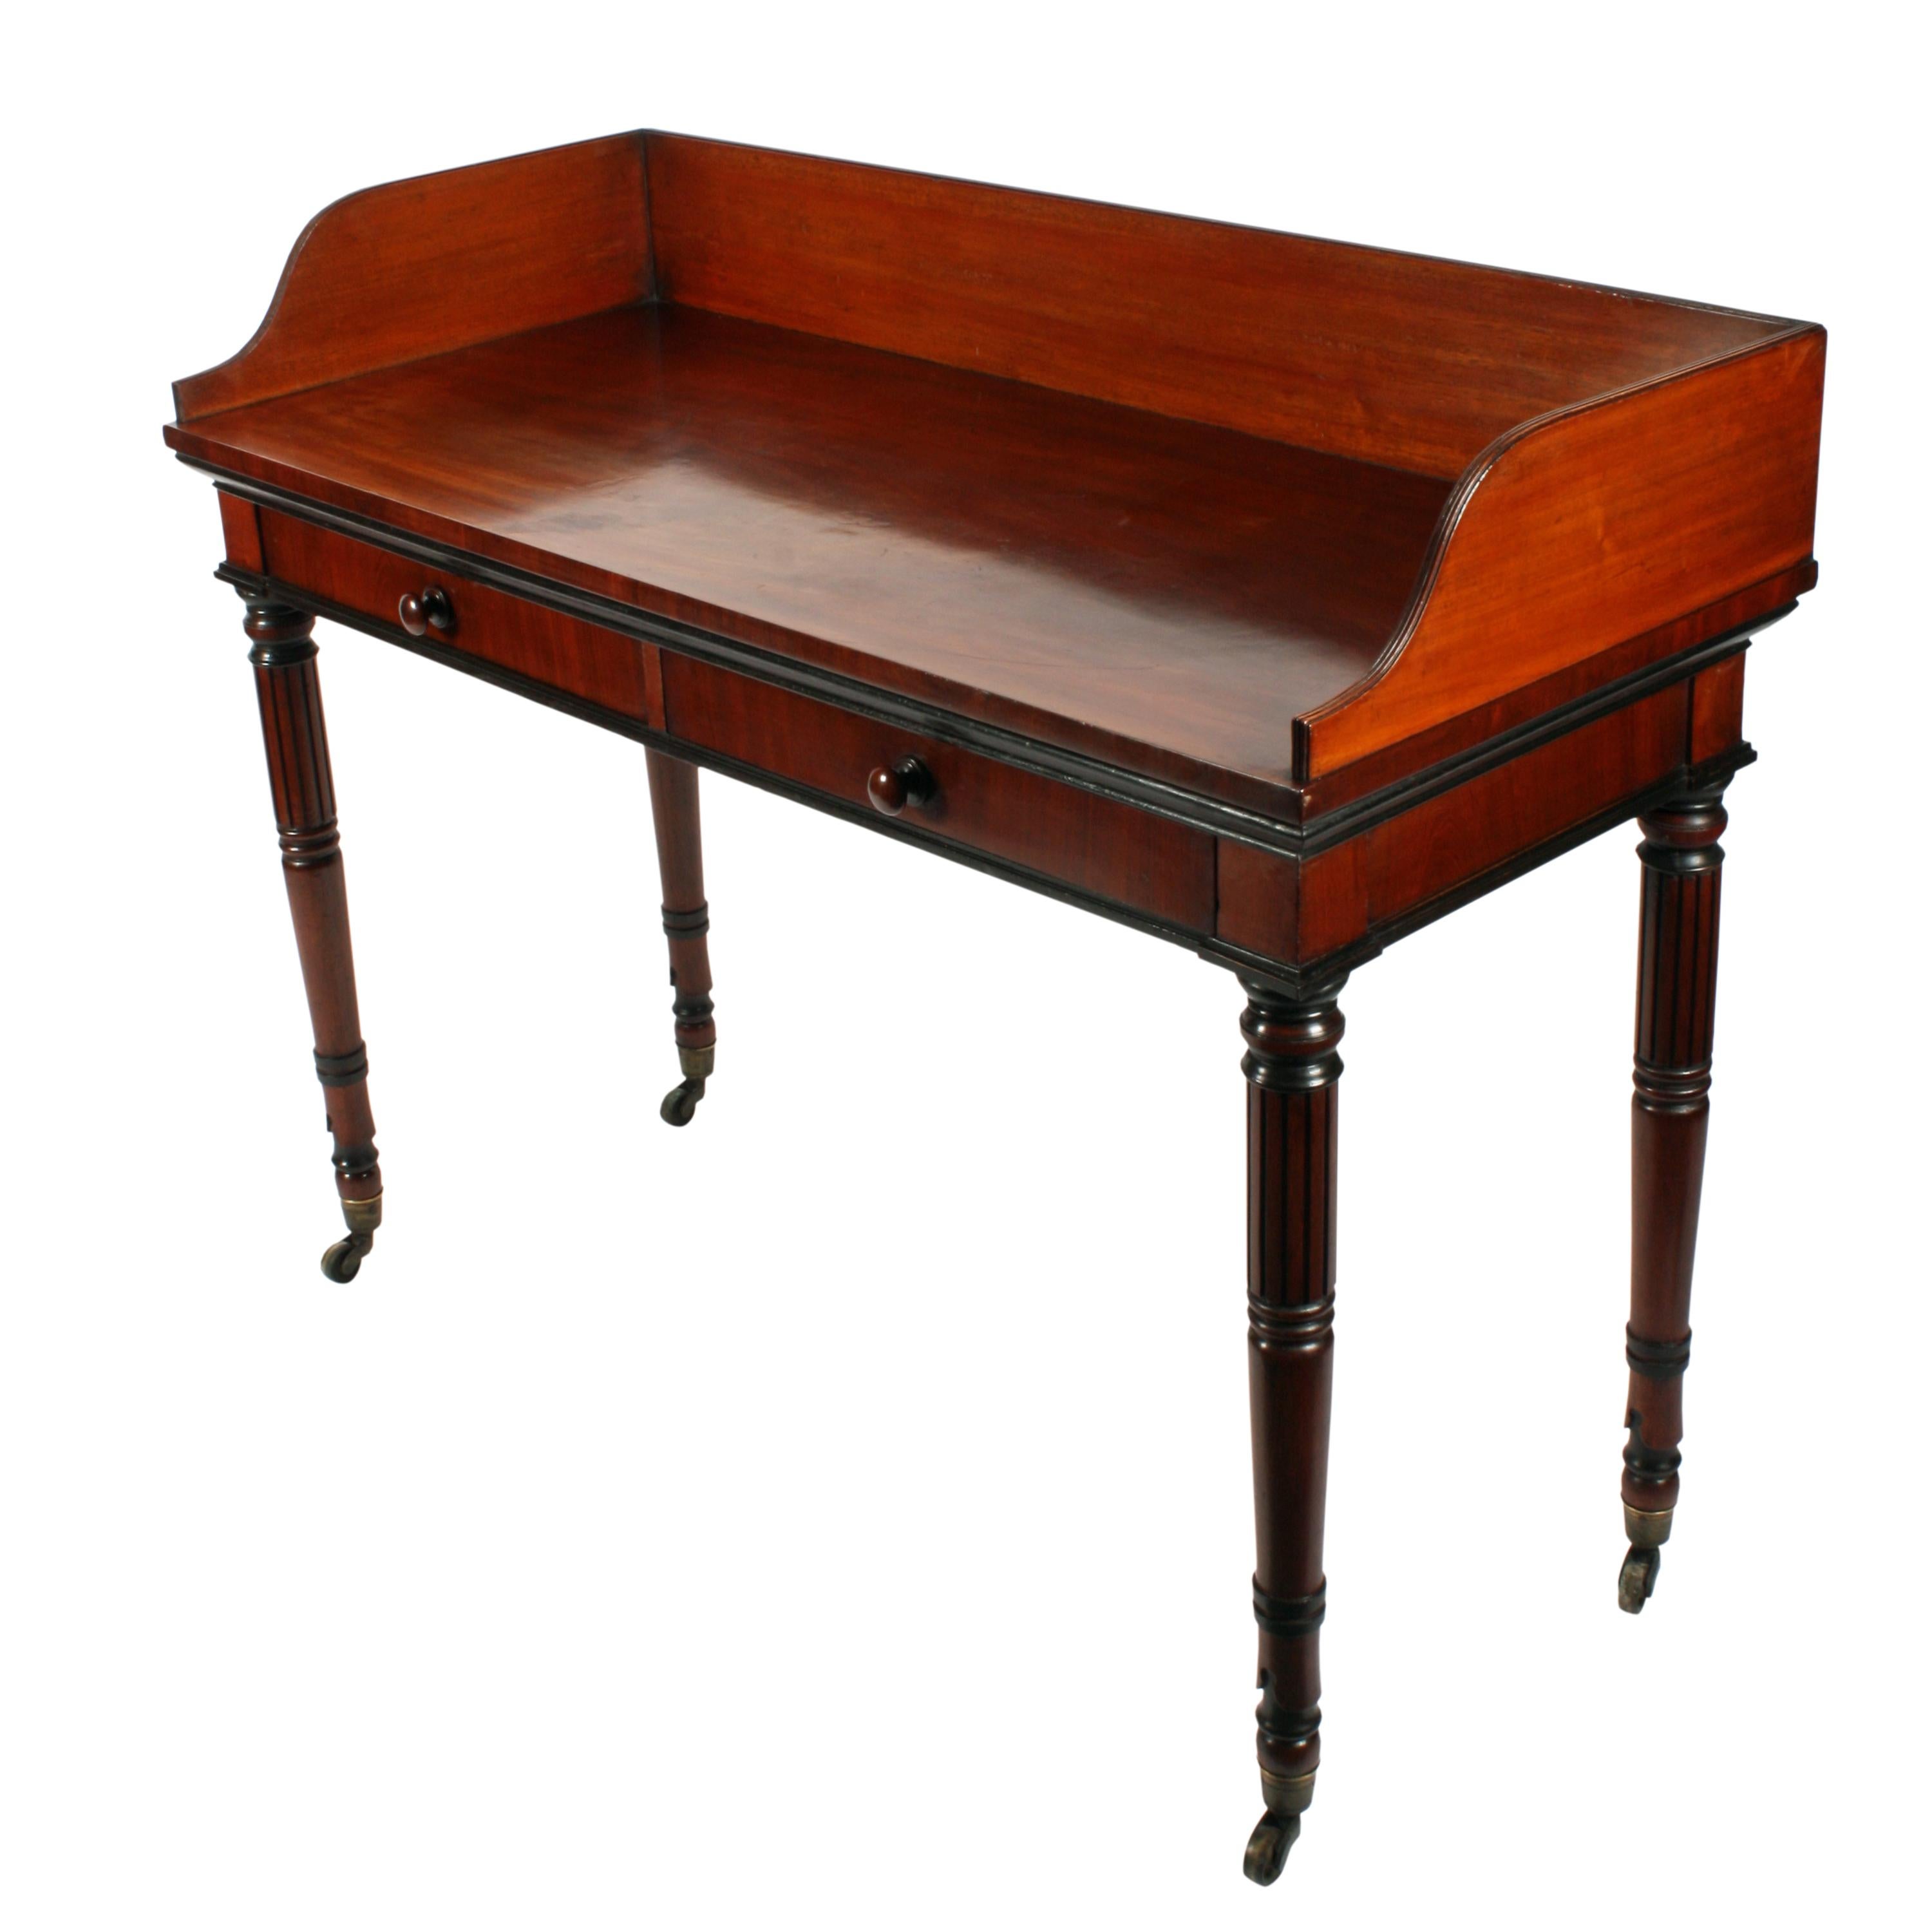 An early 19th century Georgian mahogany Gillows design mahogany two drawer side table.

The table has come from the estate of the Duke & Duchess of Northumberland and has an inventory number in the left hand drawer.

The table has a gallery back